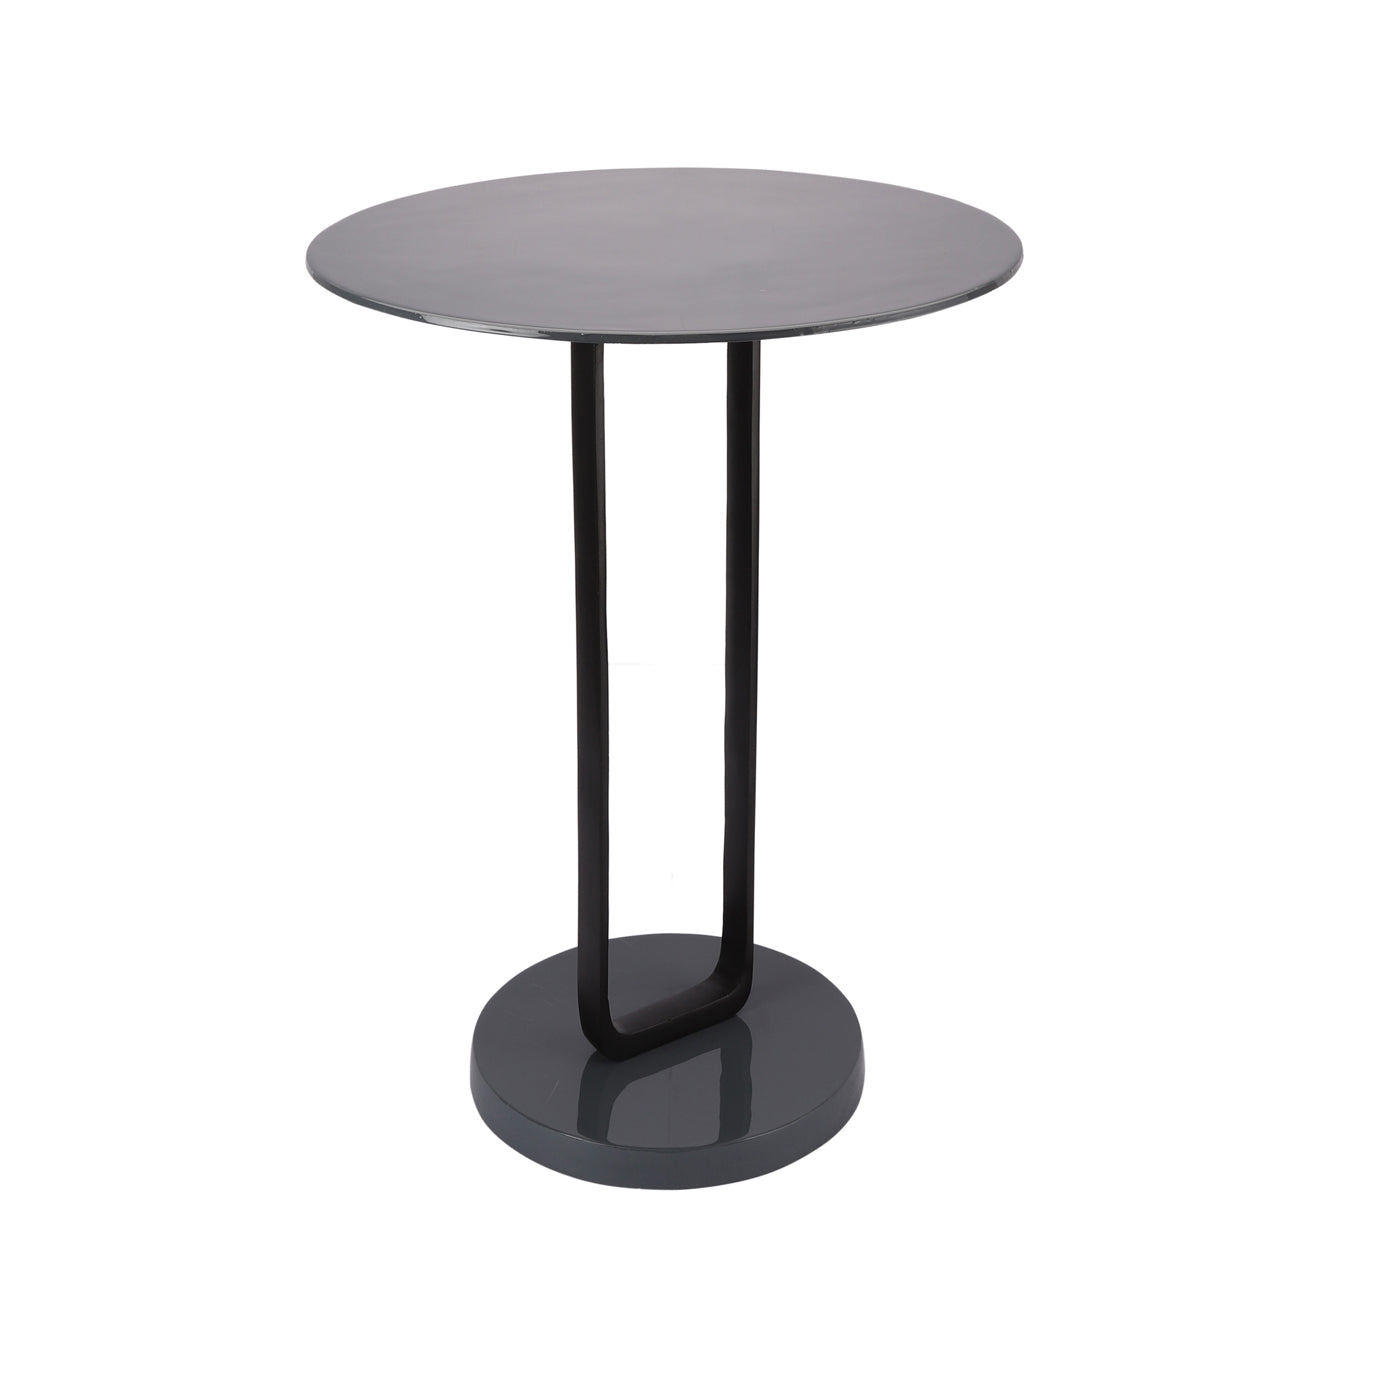 Irwin's Rectange Table by in Black and Grey